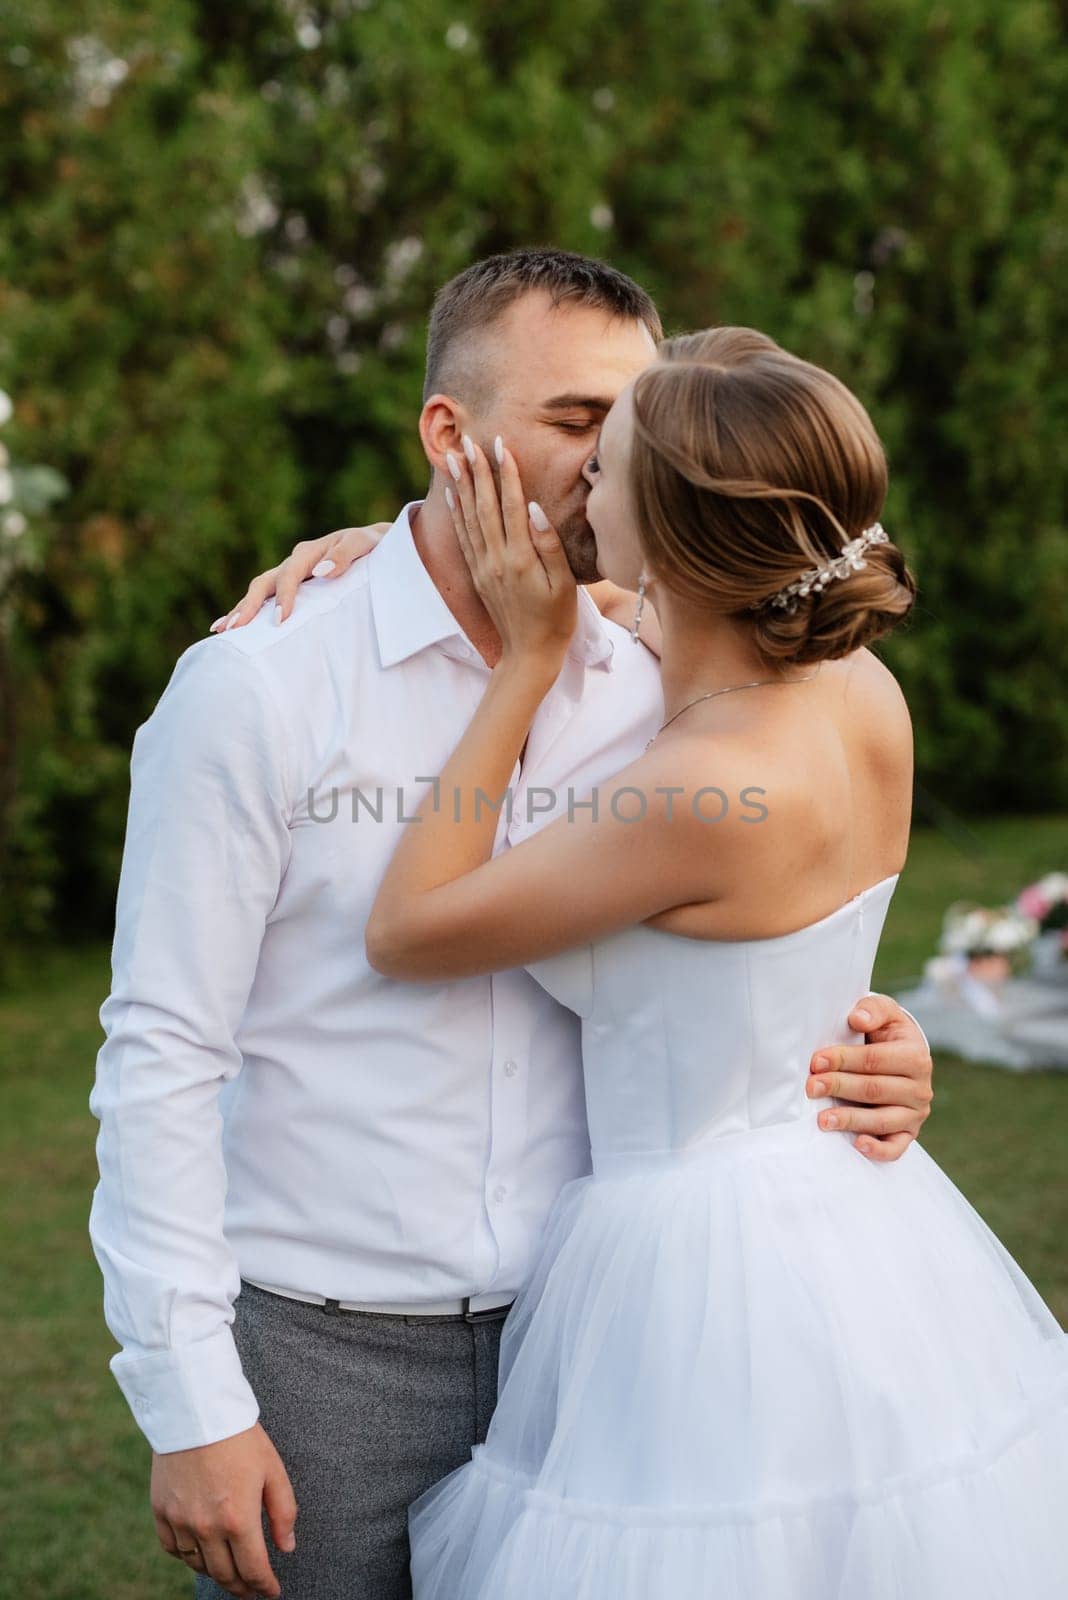 the first dance of the groom and bride in a short wedding dress on a green meadow by Andreua